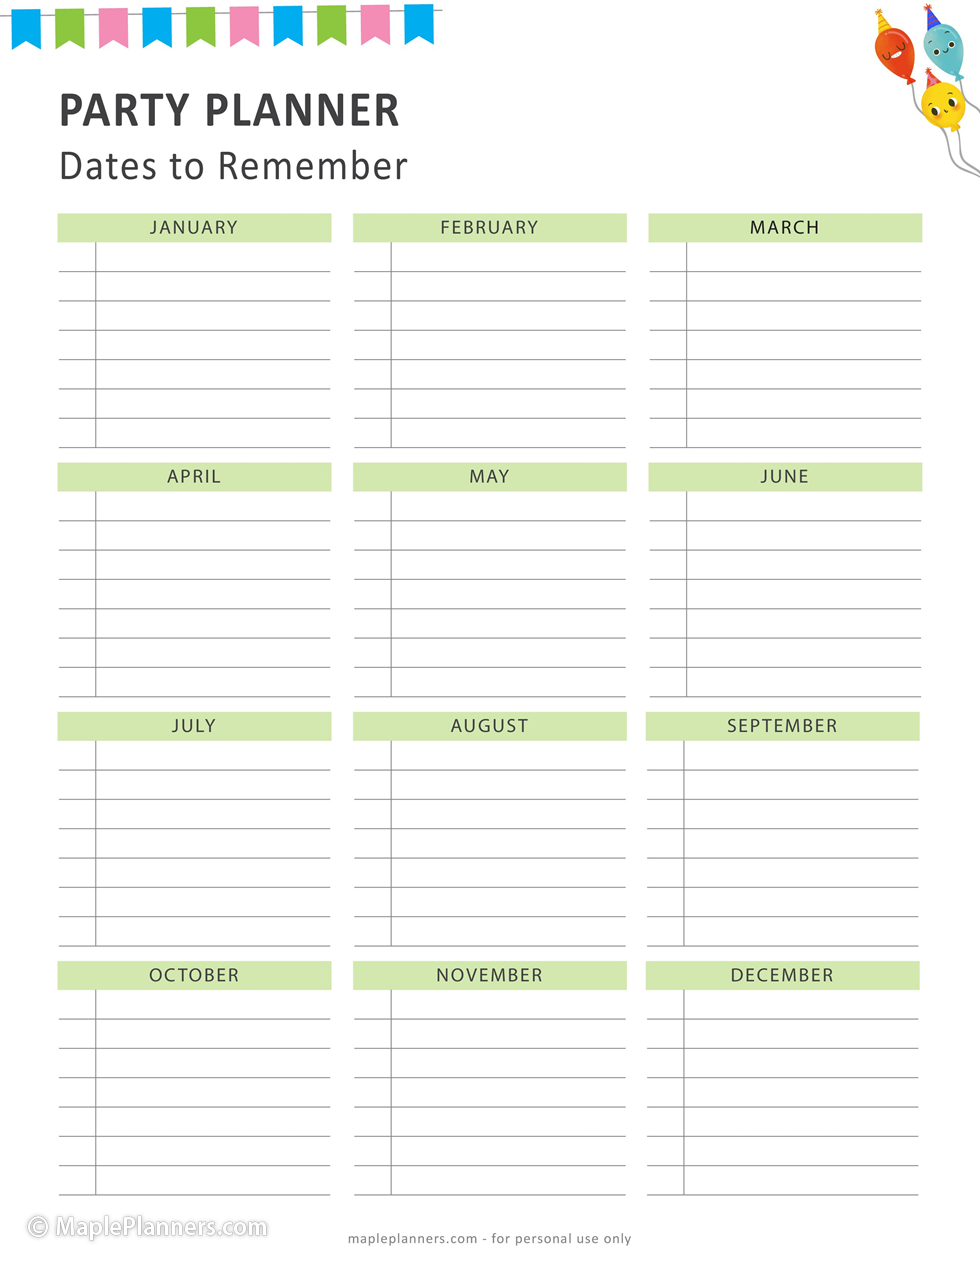 Party Planner Dates to Remember